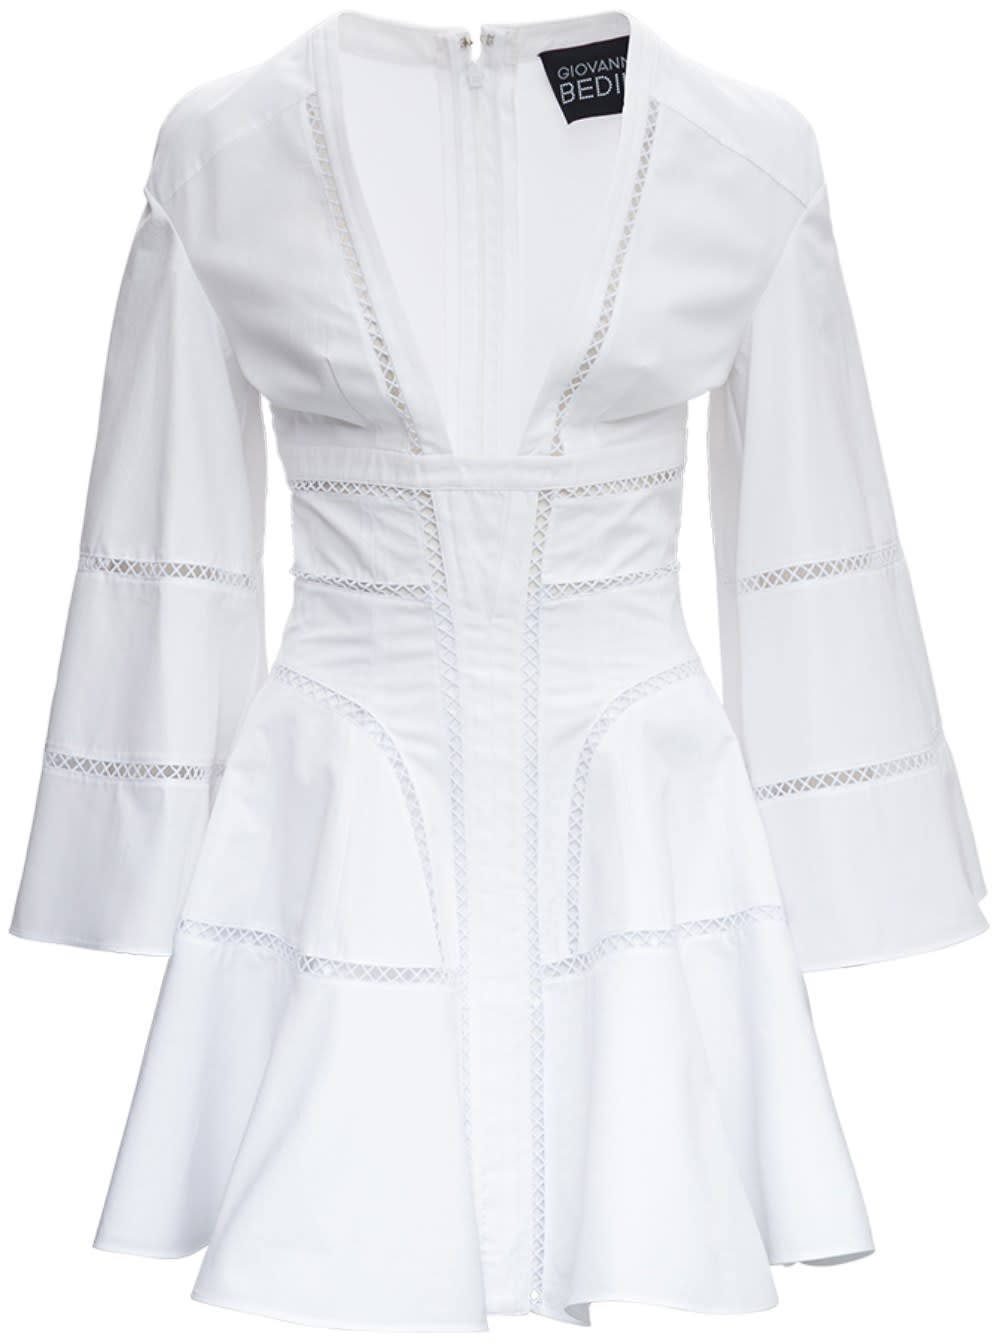 Giovanni Bedin White Cotton Dress With Perforated Inlays